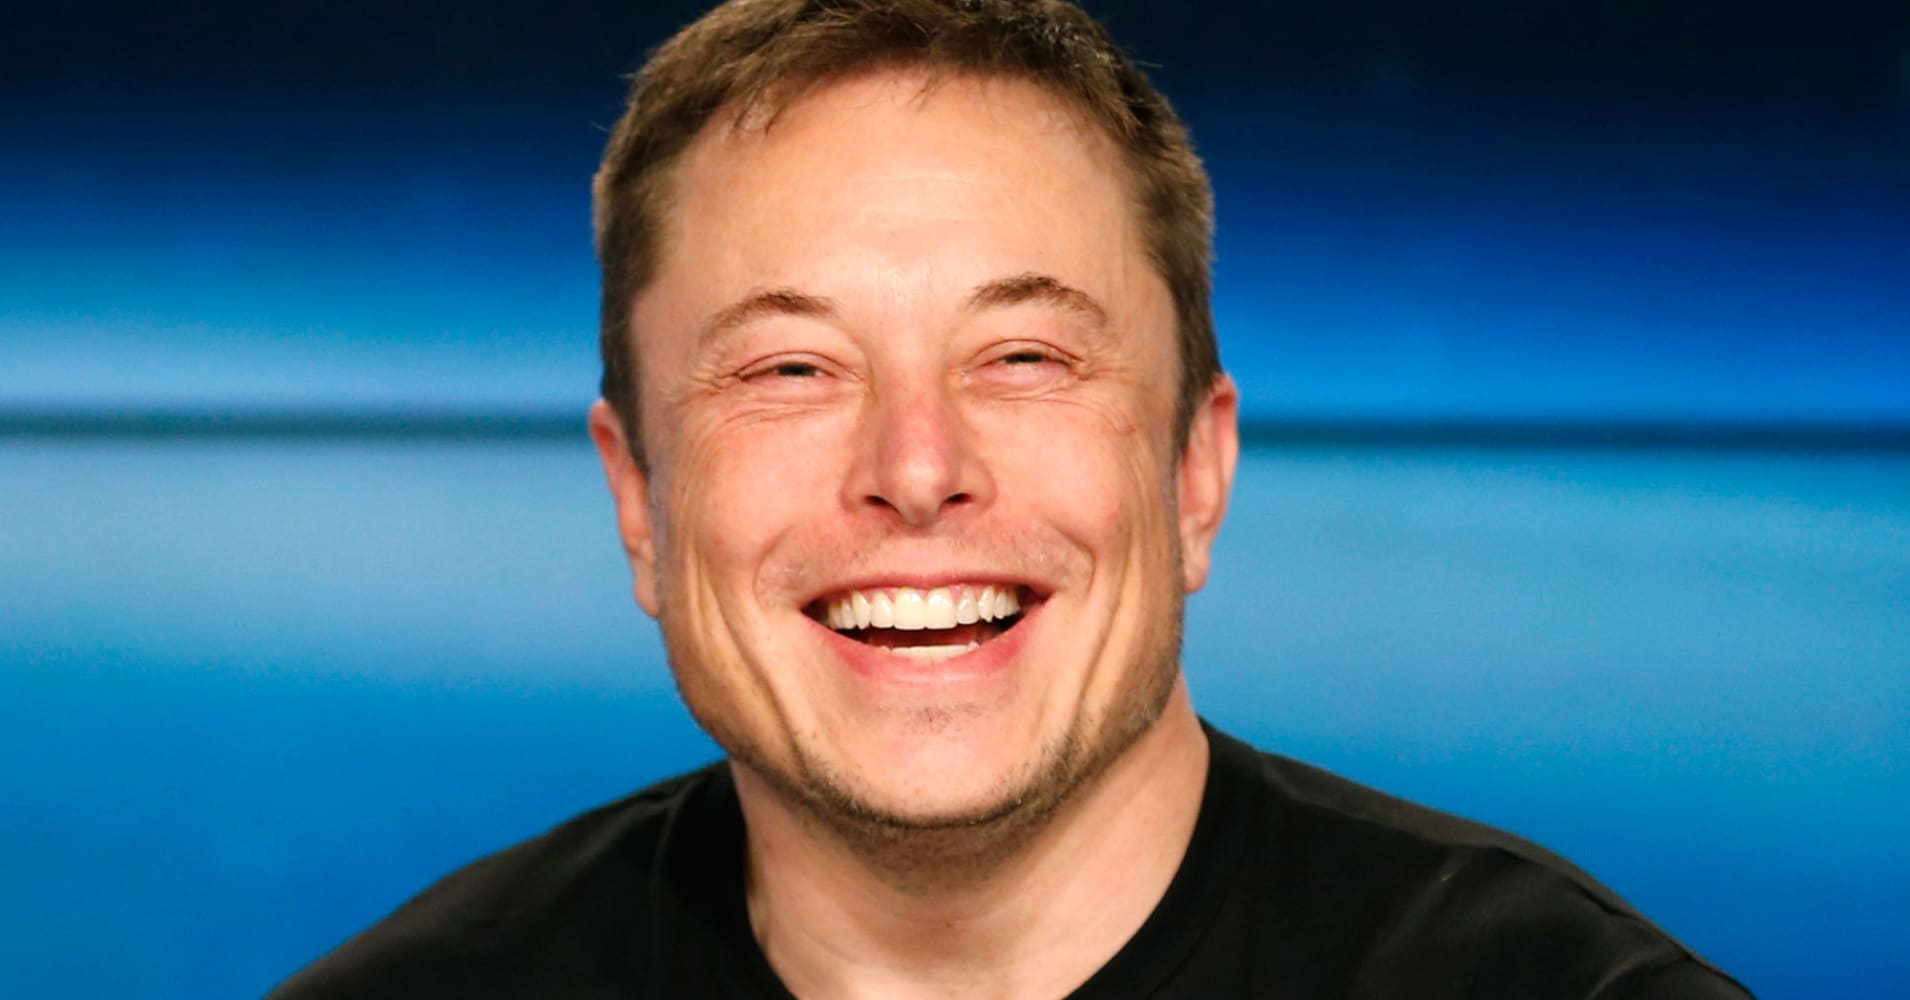 Elon Musk once lived spending $1 a day on food